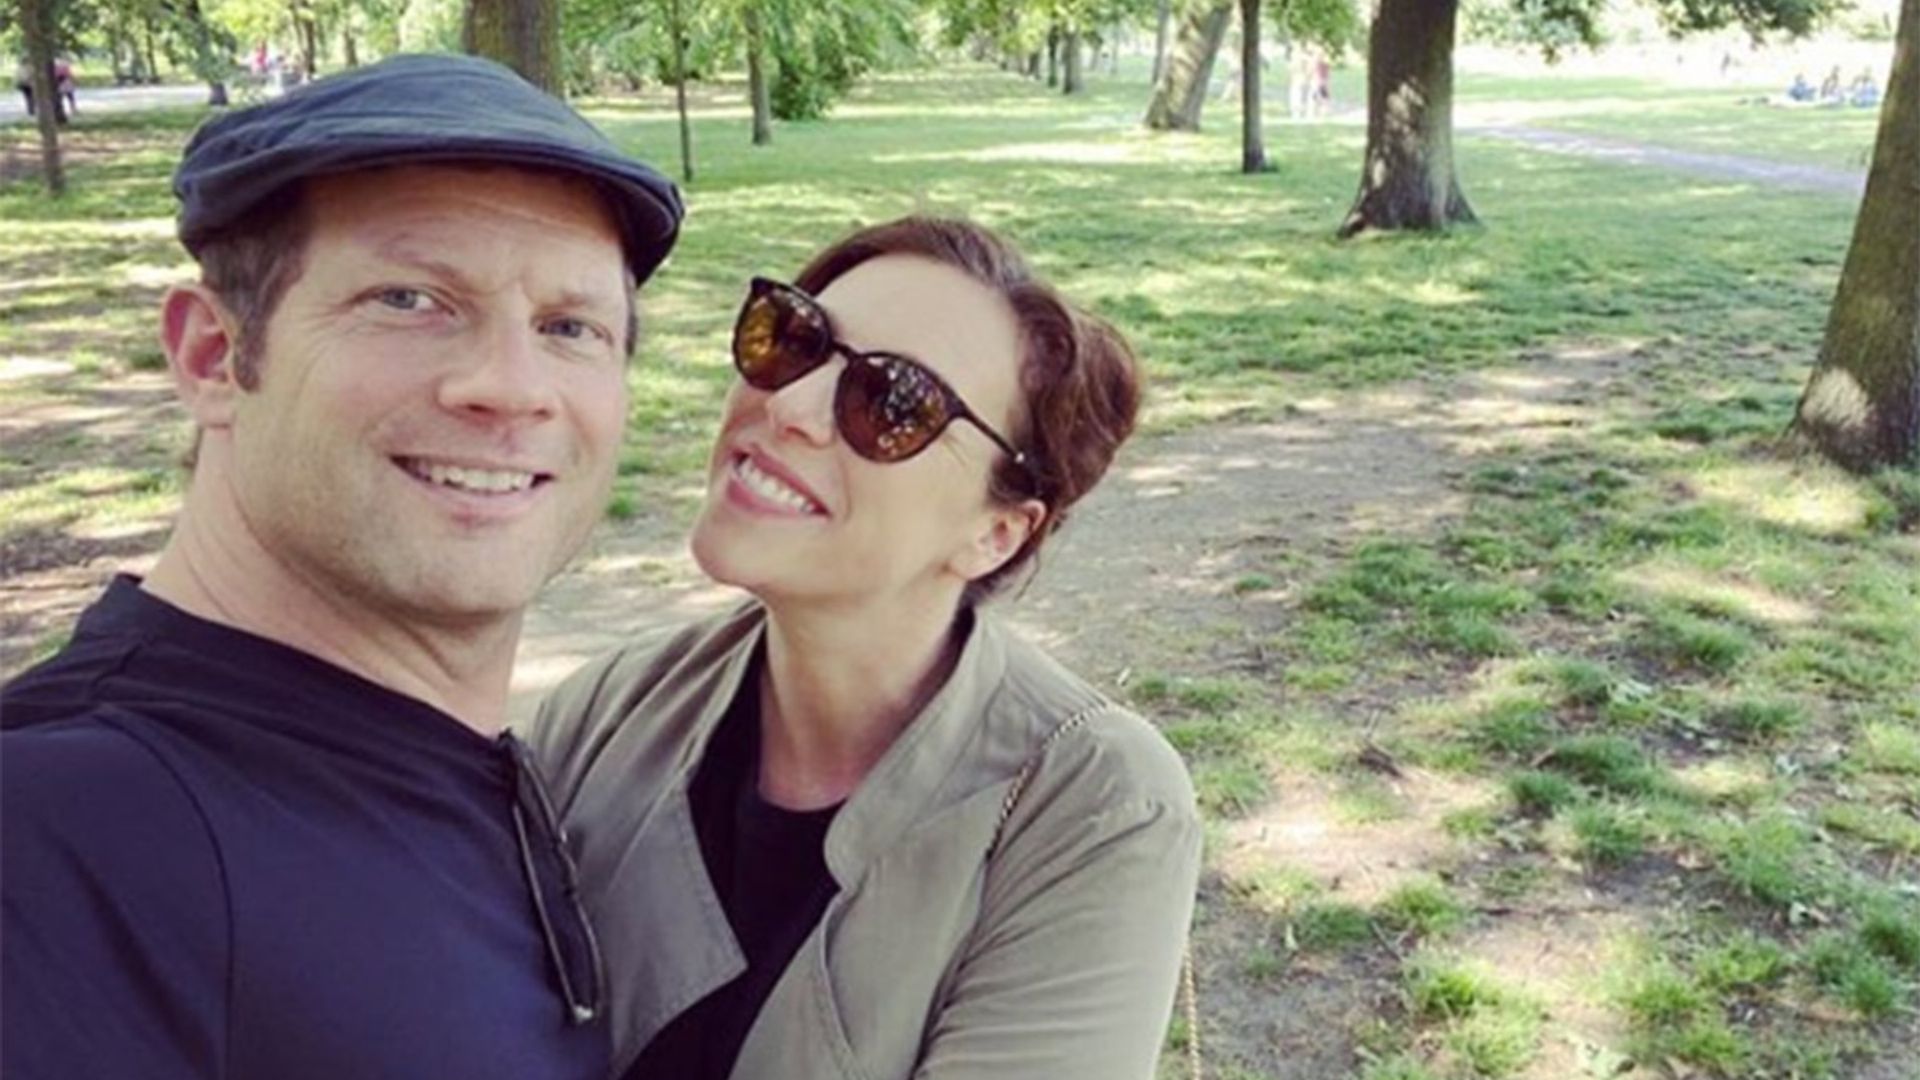 Major celebrations for Dermot O'Leary and his wife Dee Koppang